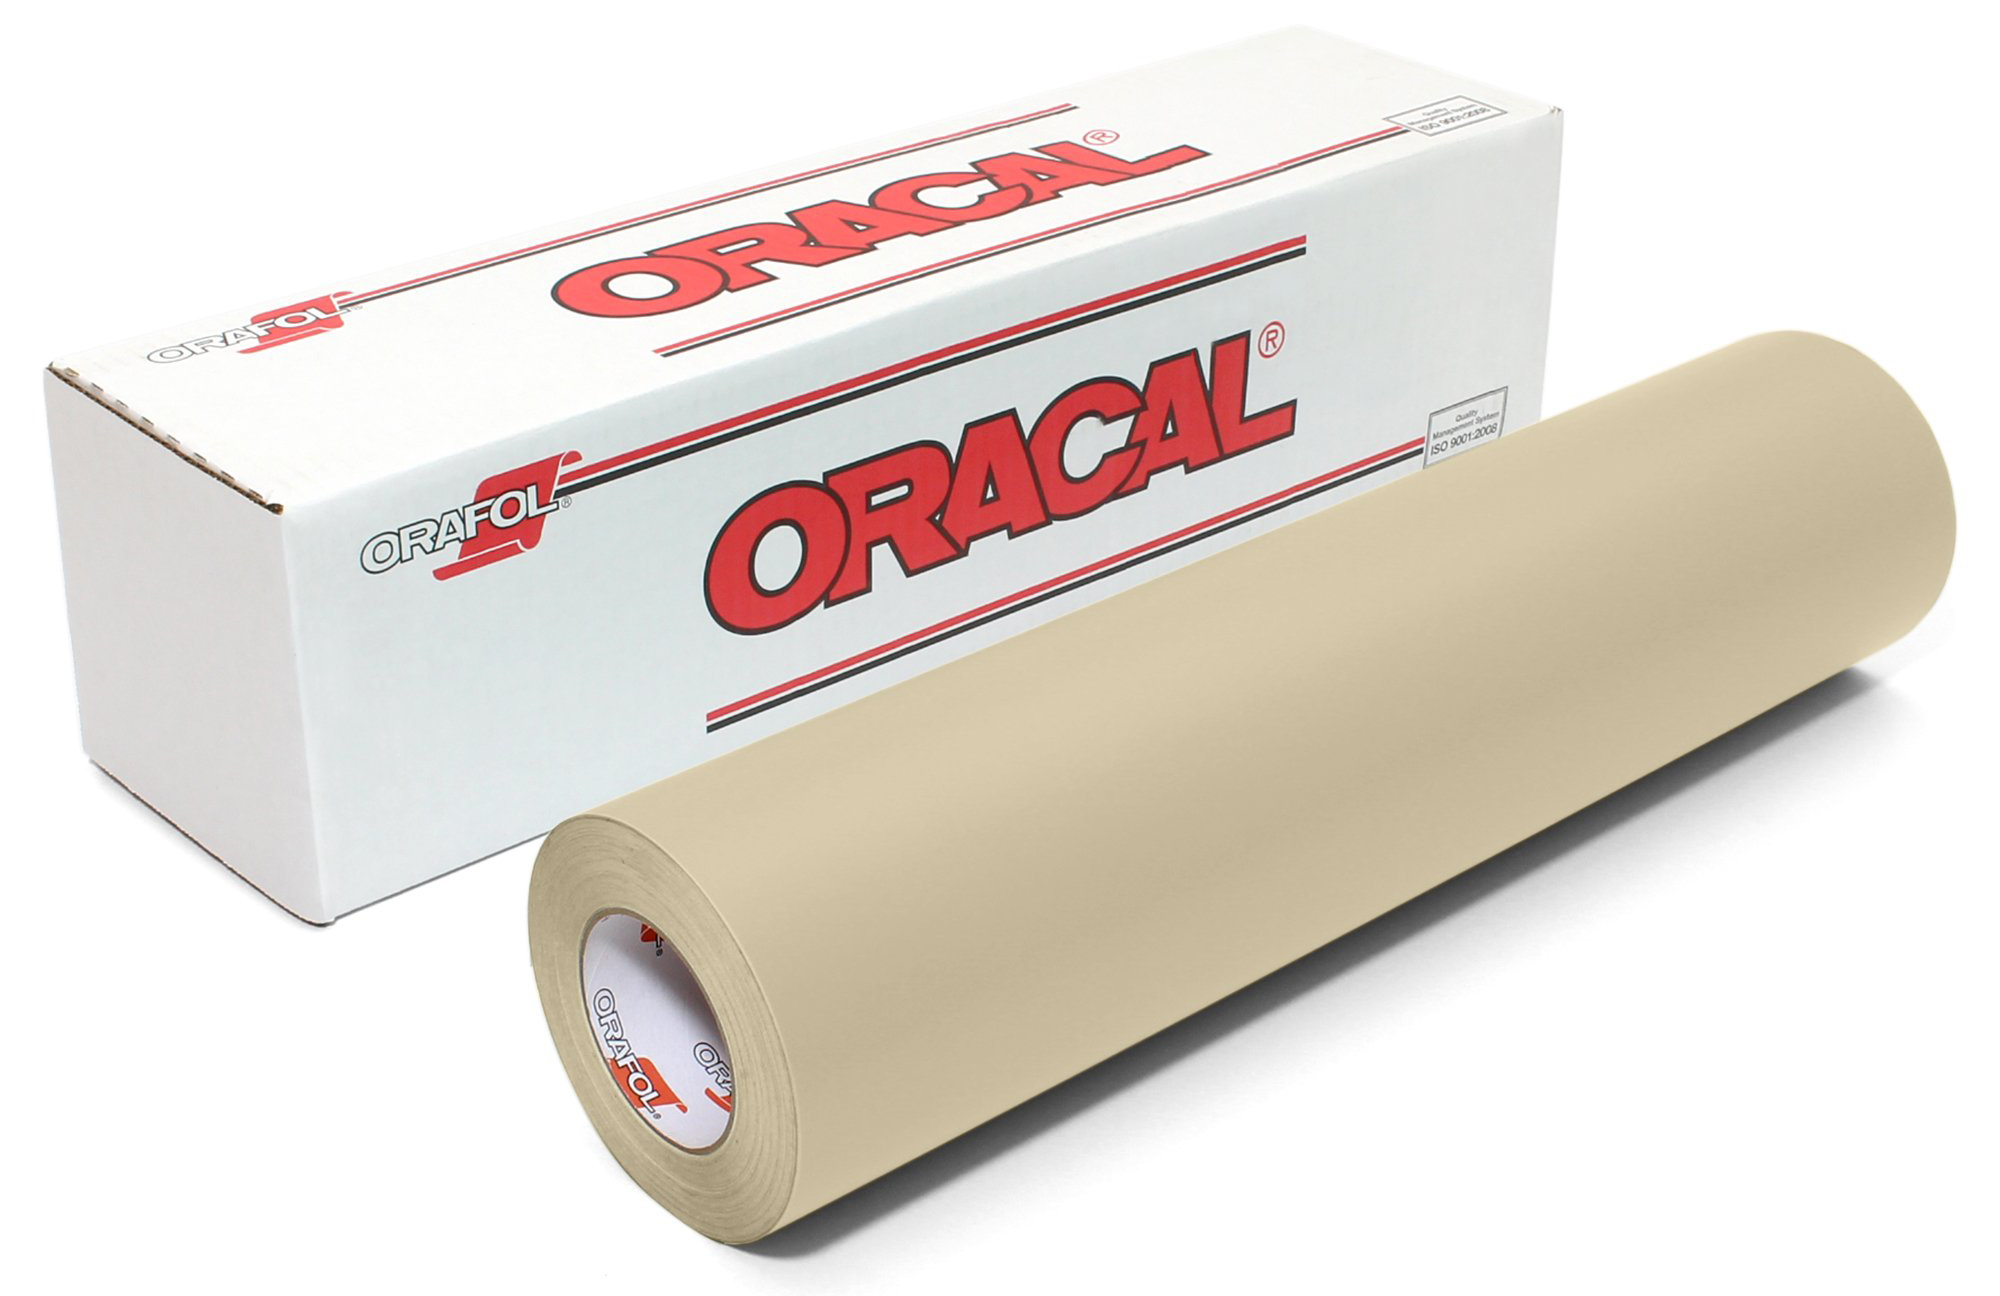 24IN BEIGE 631 EXHIBITION CAL - Oracal 631 Exhibition Calendered PVC Film